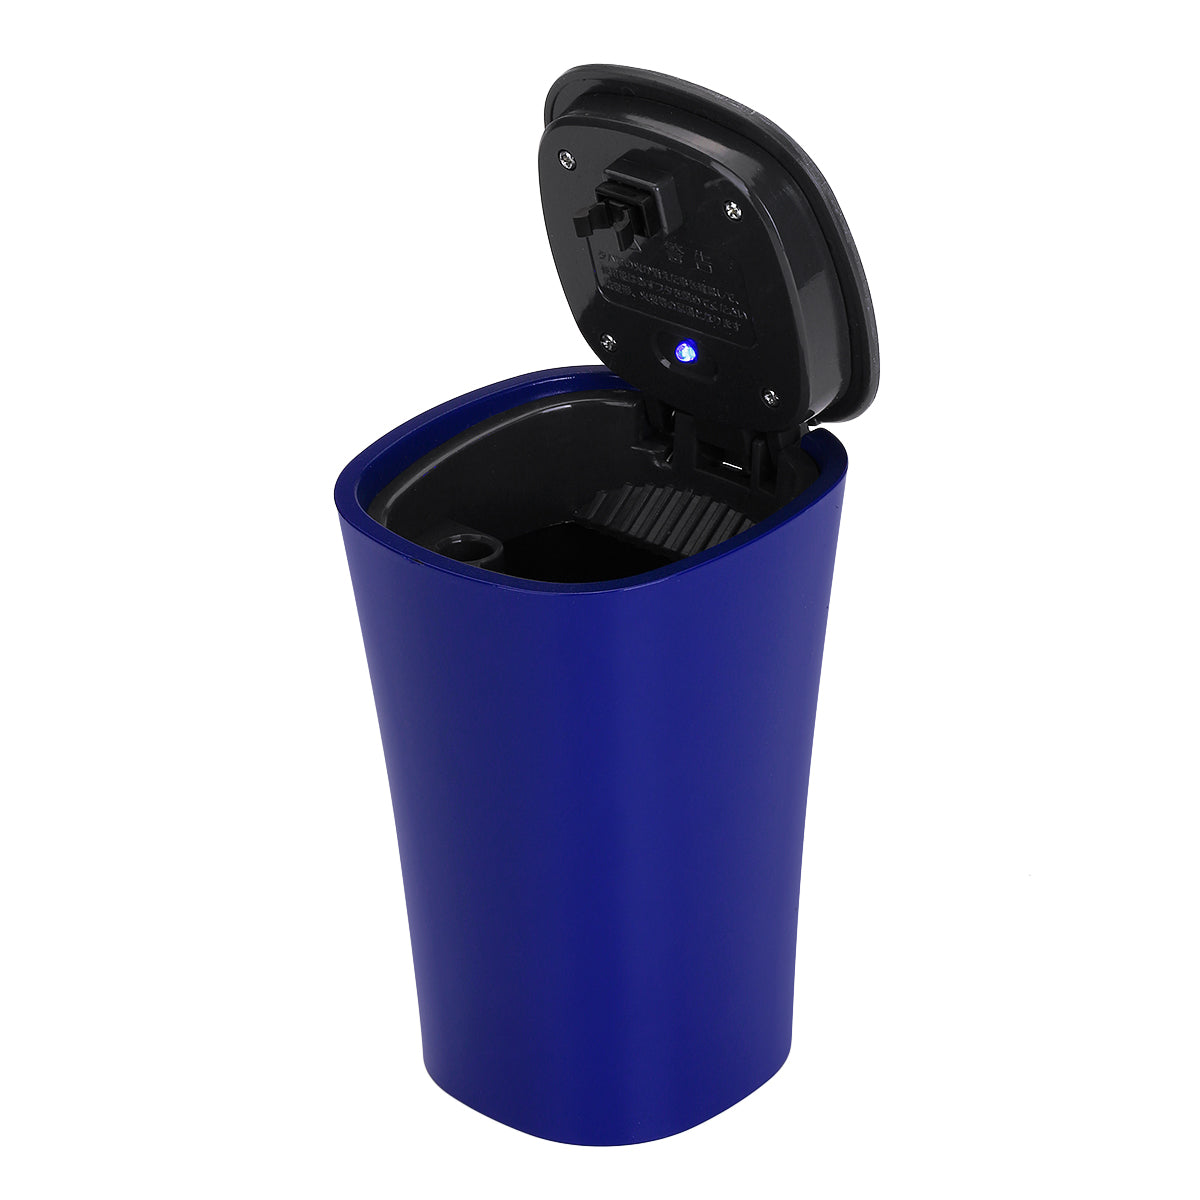 Midnight Blue Car Ashtray With Blue LED Light Automatic Solar Energy Smoke Cup Ash Tray